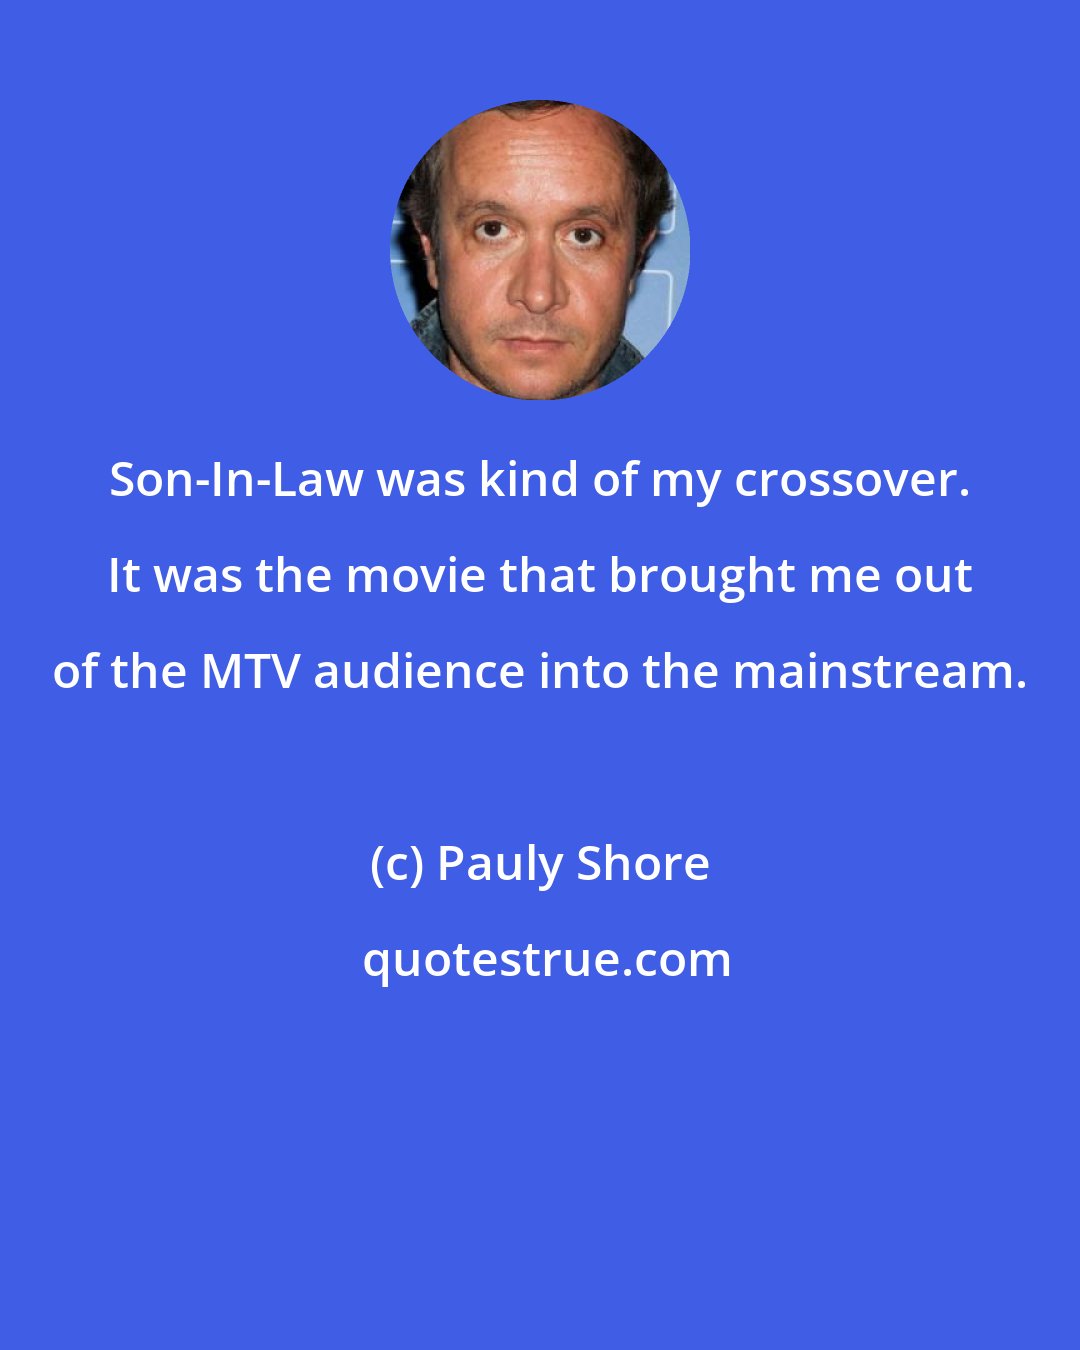 Pauly Shore: Son-In-Law was kind of my crossover. It was the movie that brought me out of the MTV audience into the mainstream.